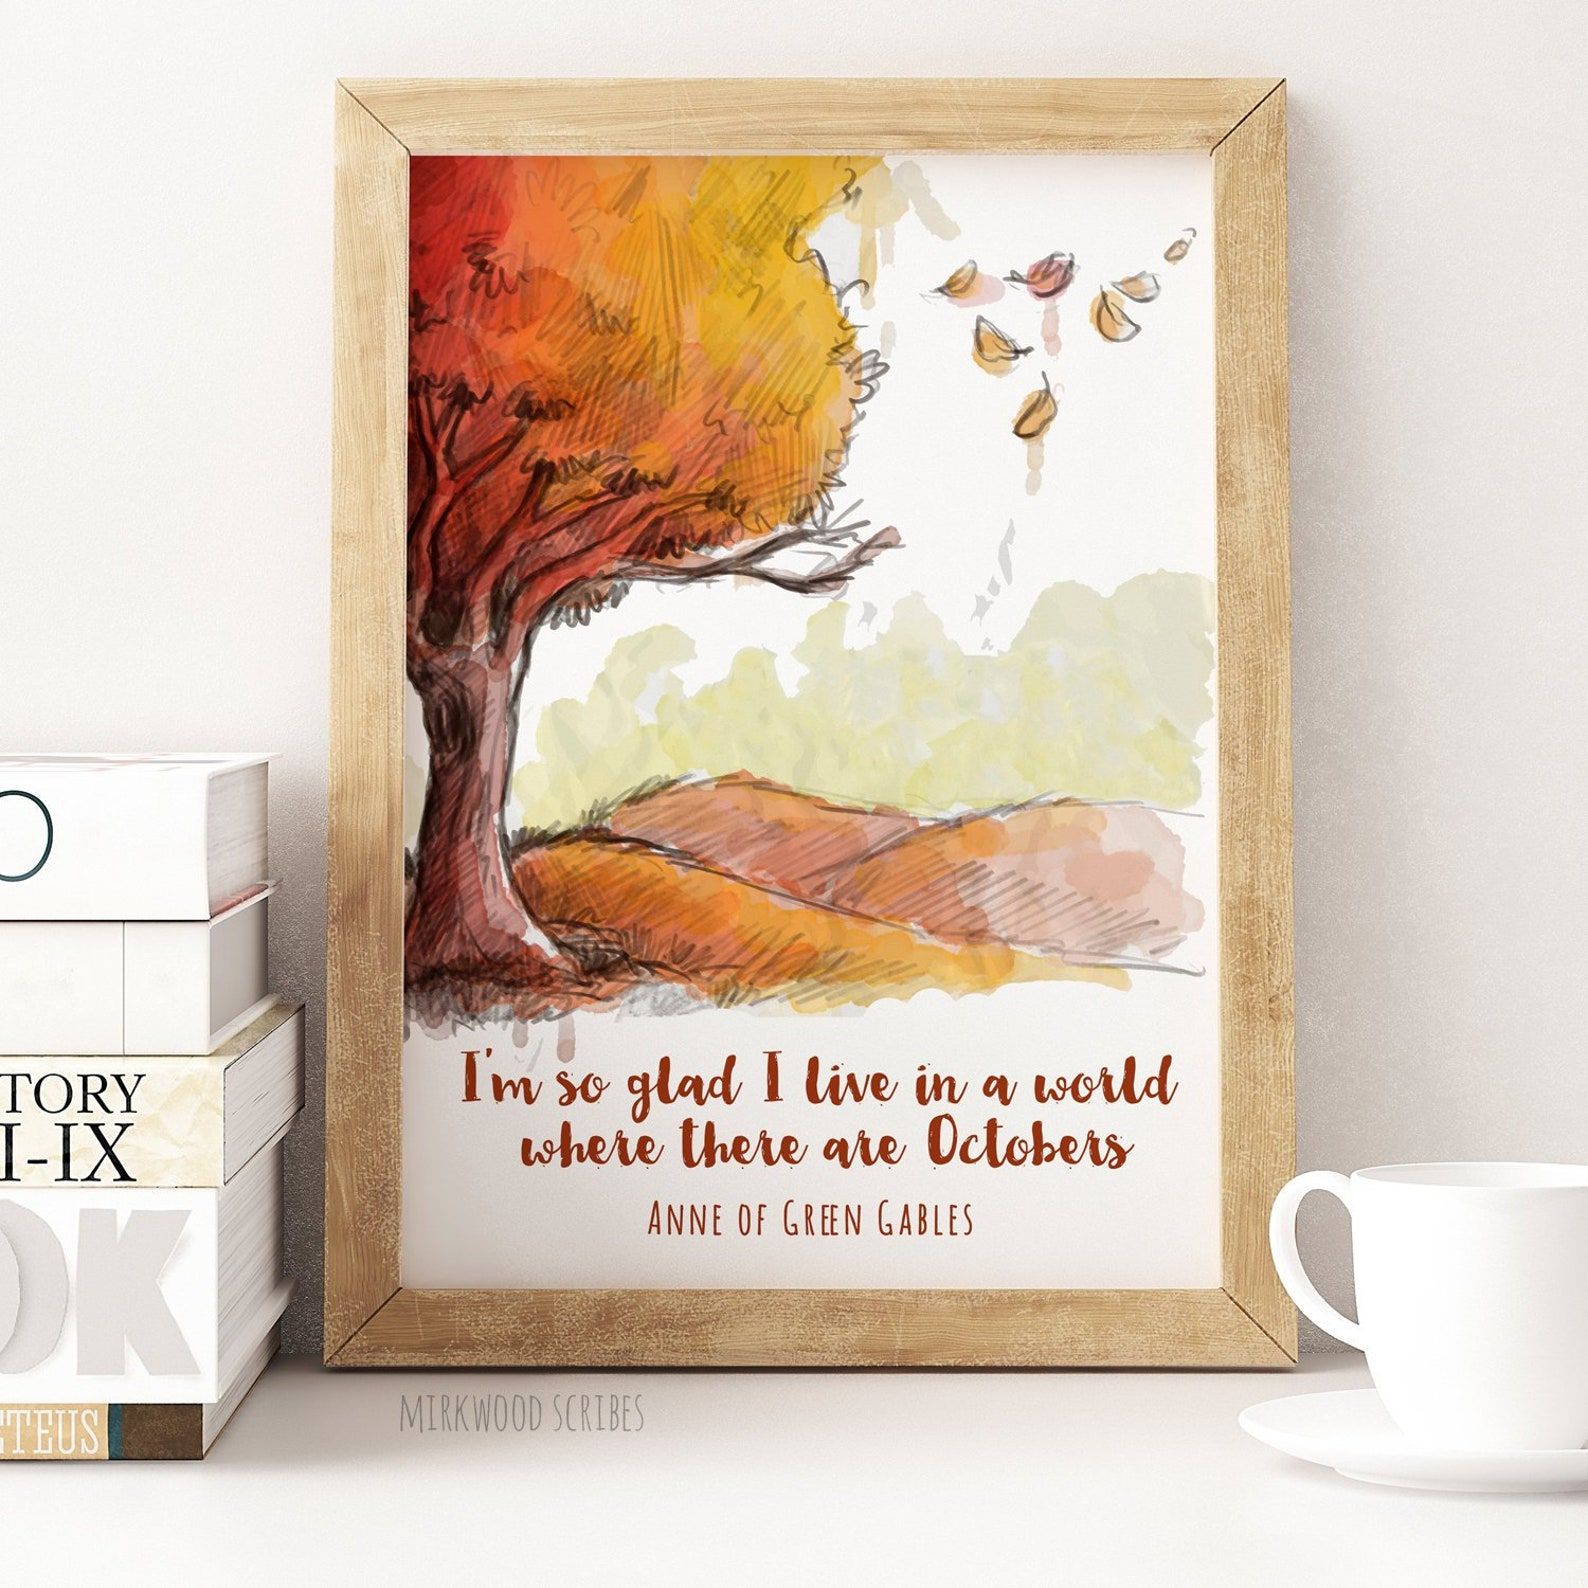 An art print depicting an orange and red autumn tree with falling leaves and the quote "I'm s glad I live in a world where there are Octobers."